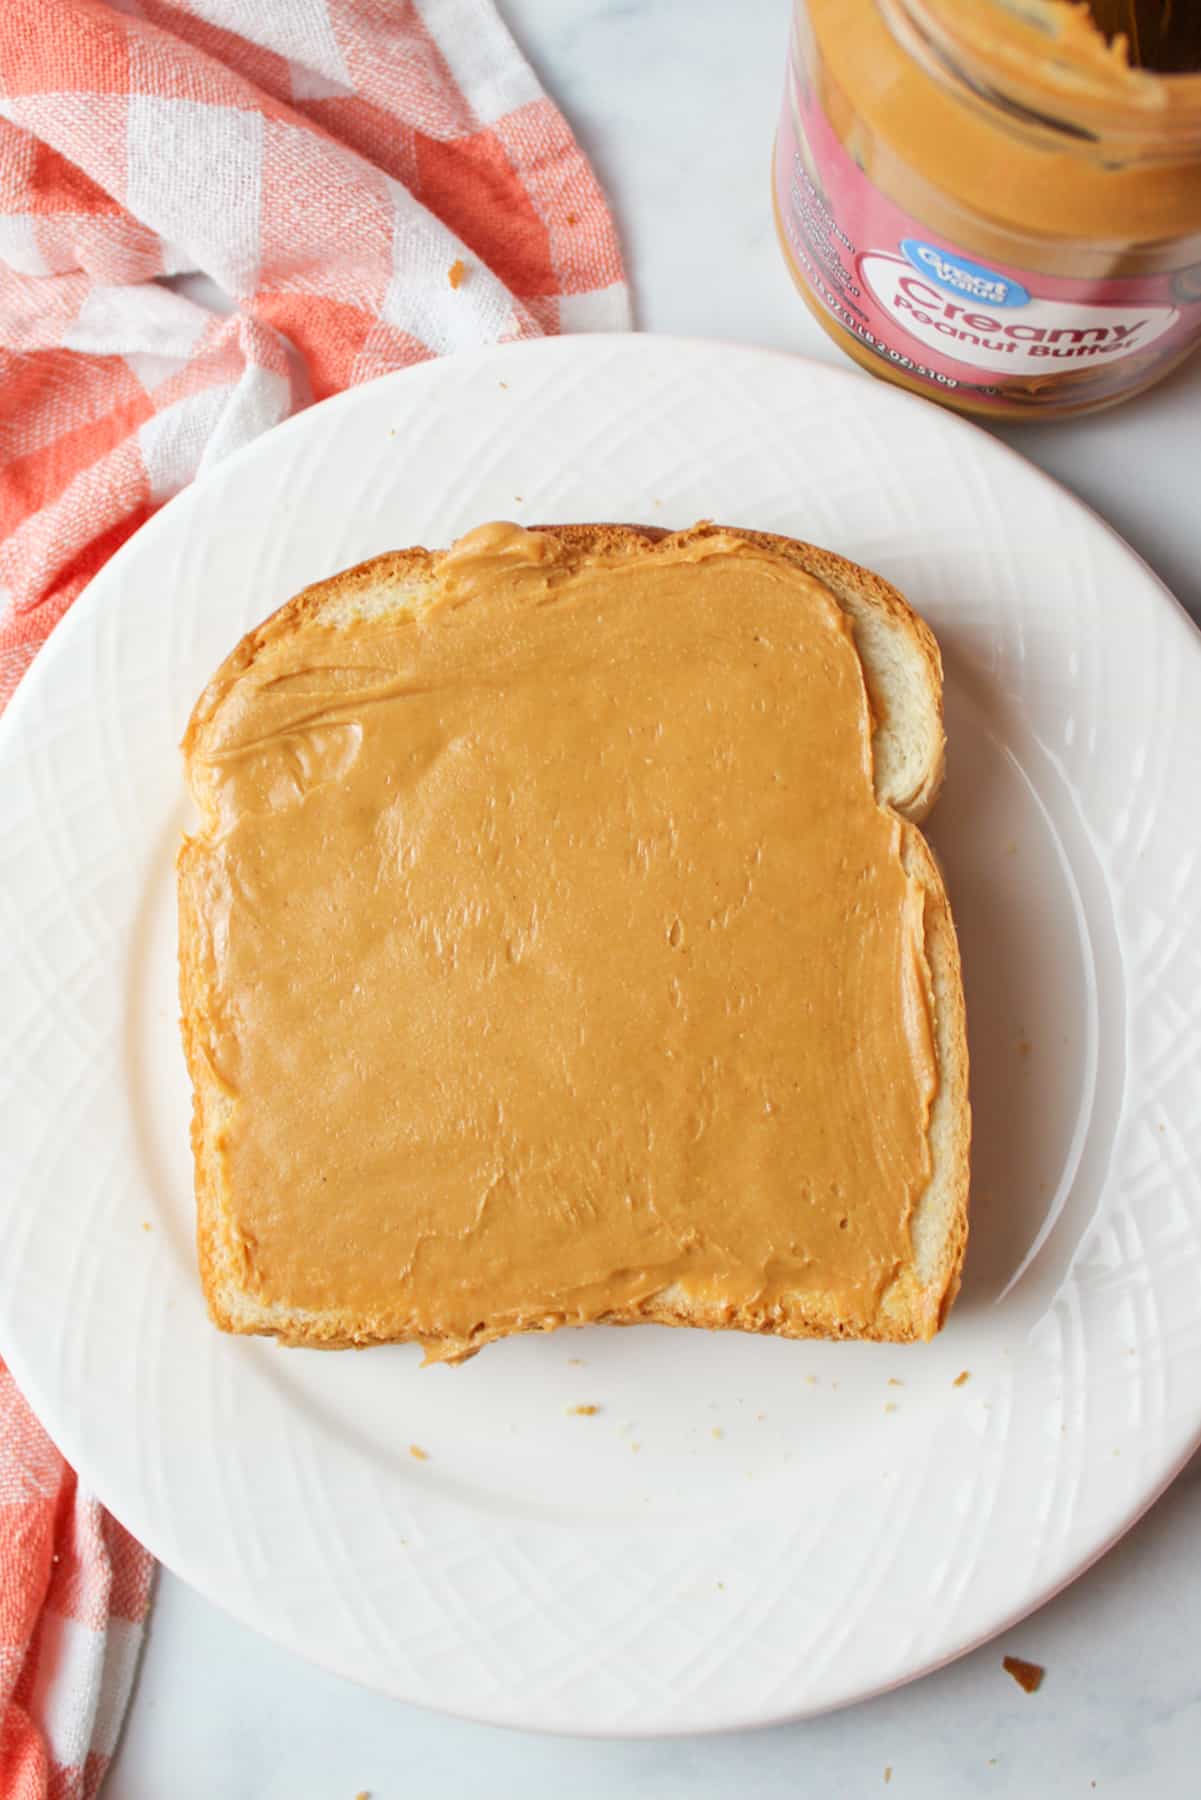 peanut butter spread onto a slice of bread on a white plate.